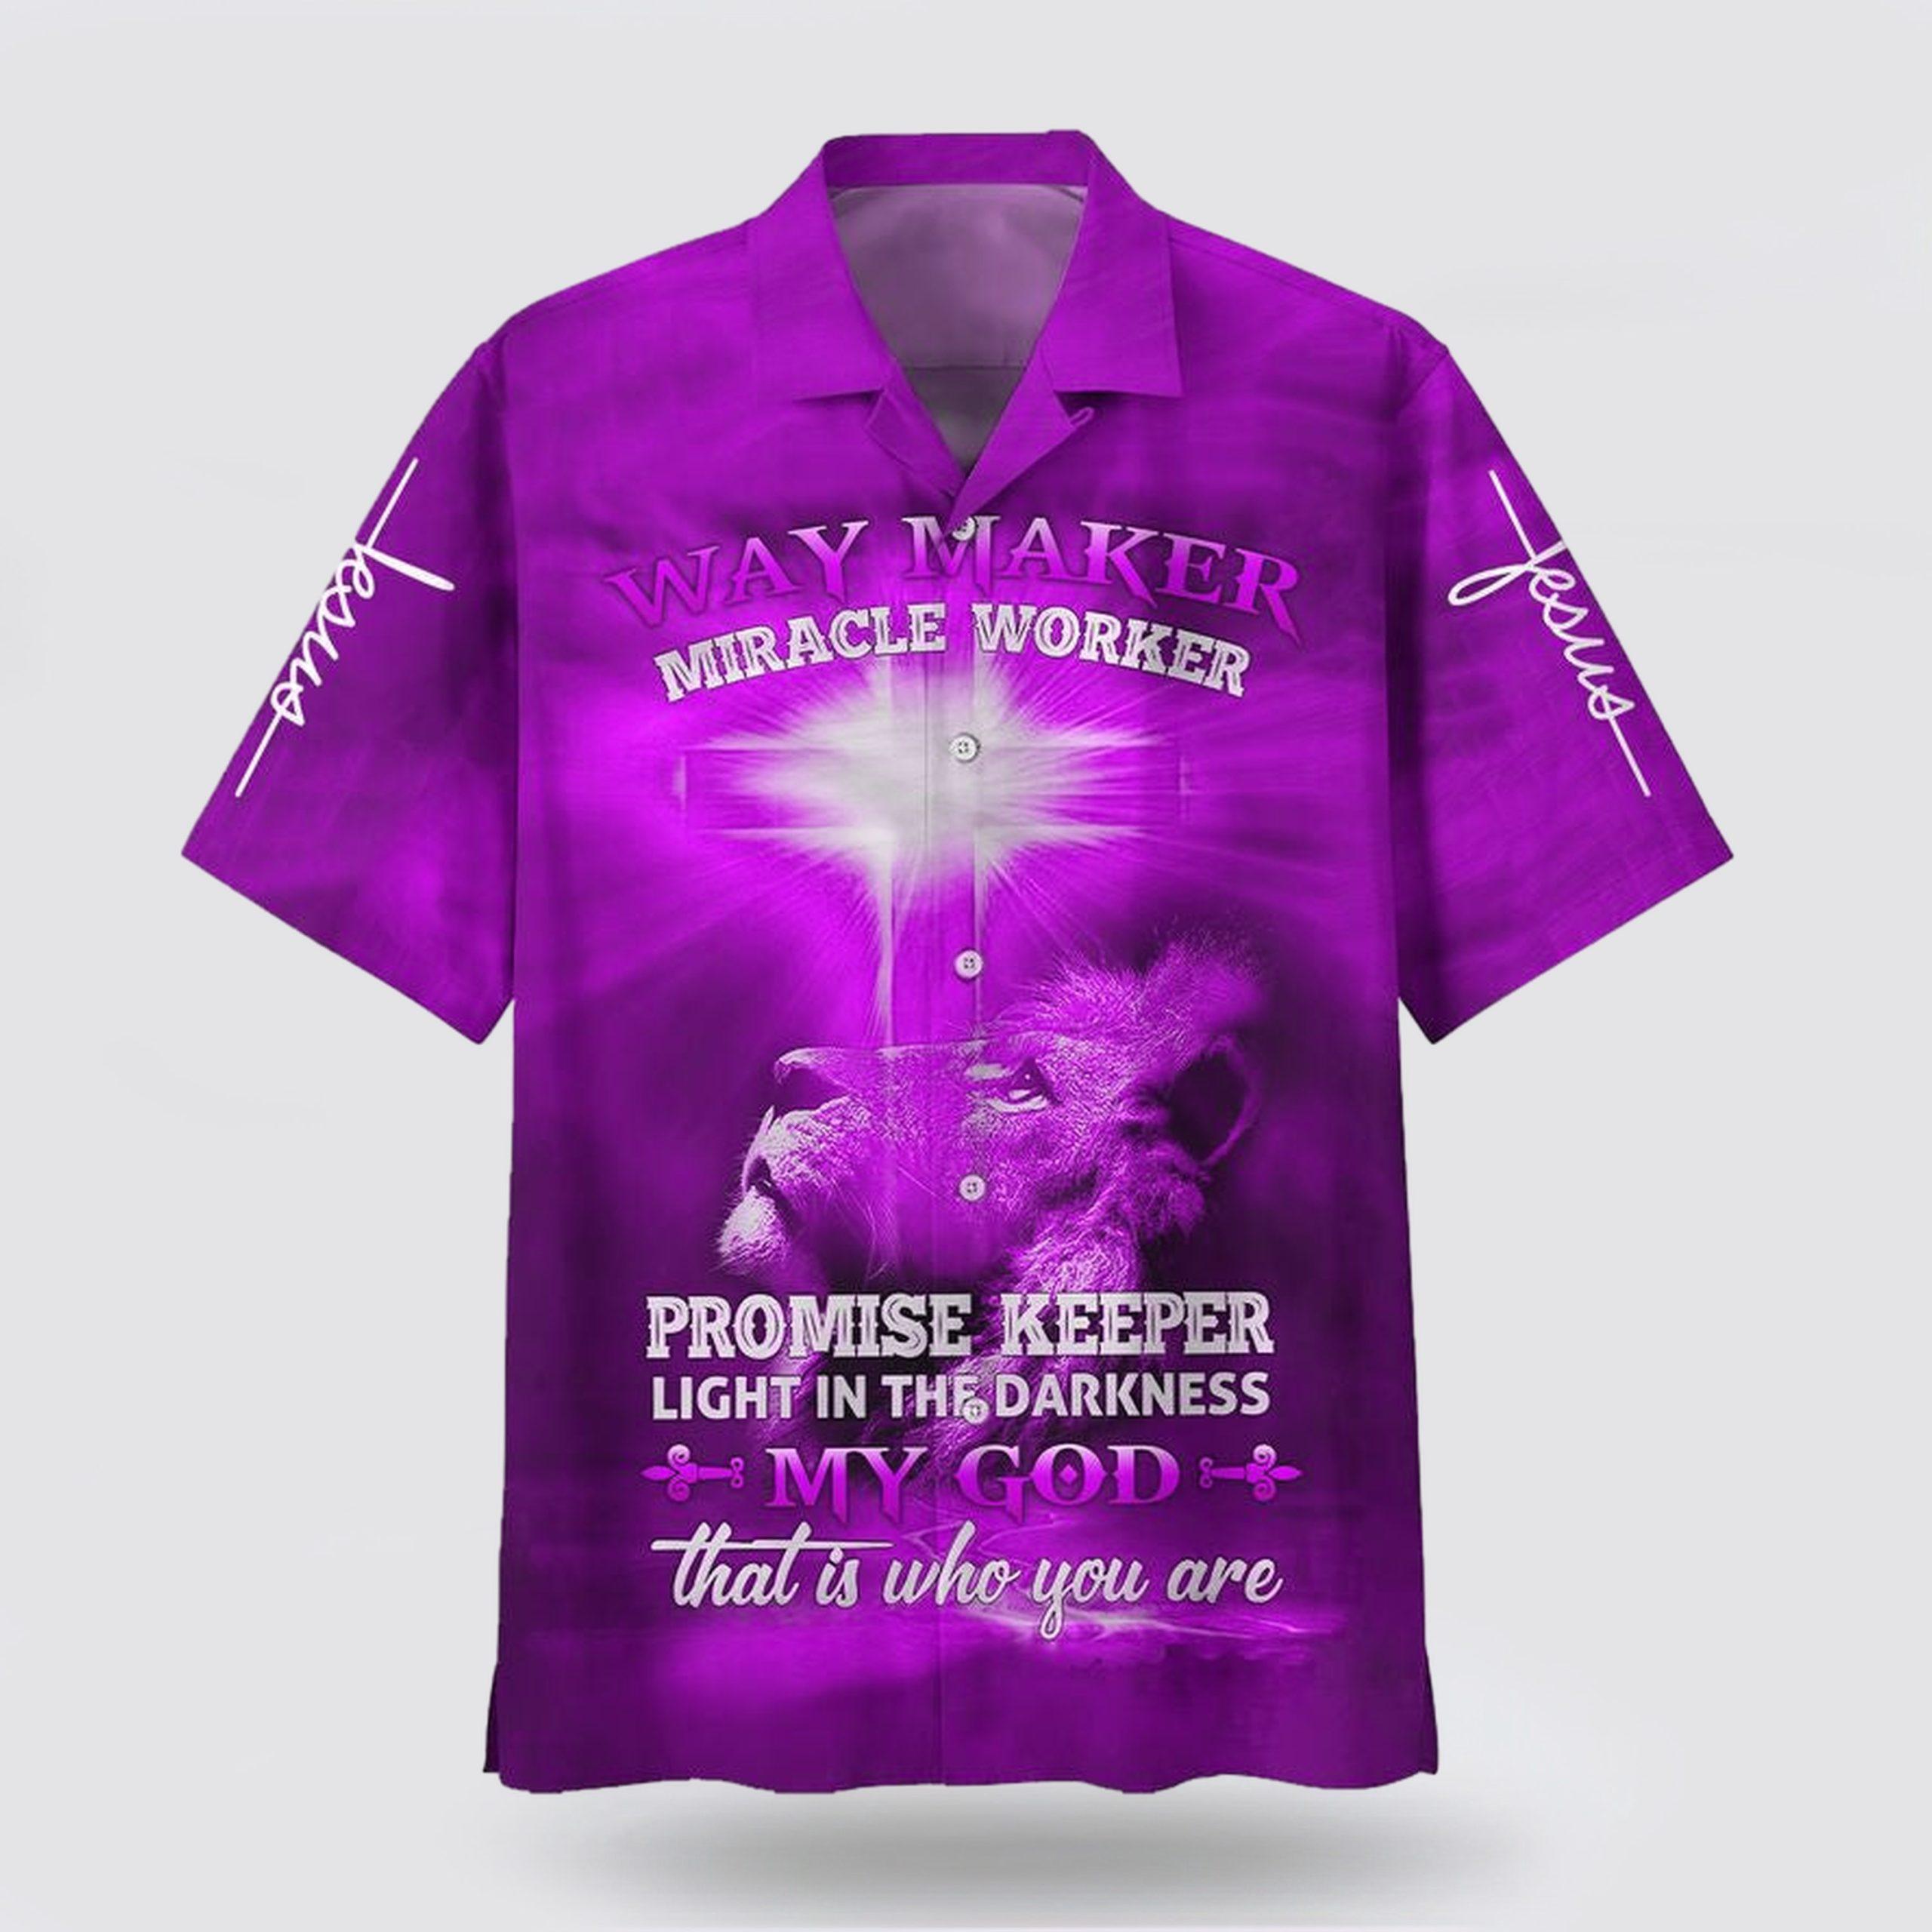 Way Maker Miracle Worker Promise Keeper Shirt God Lovers